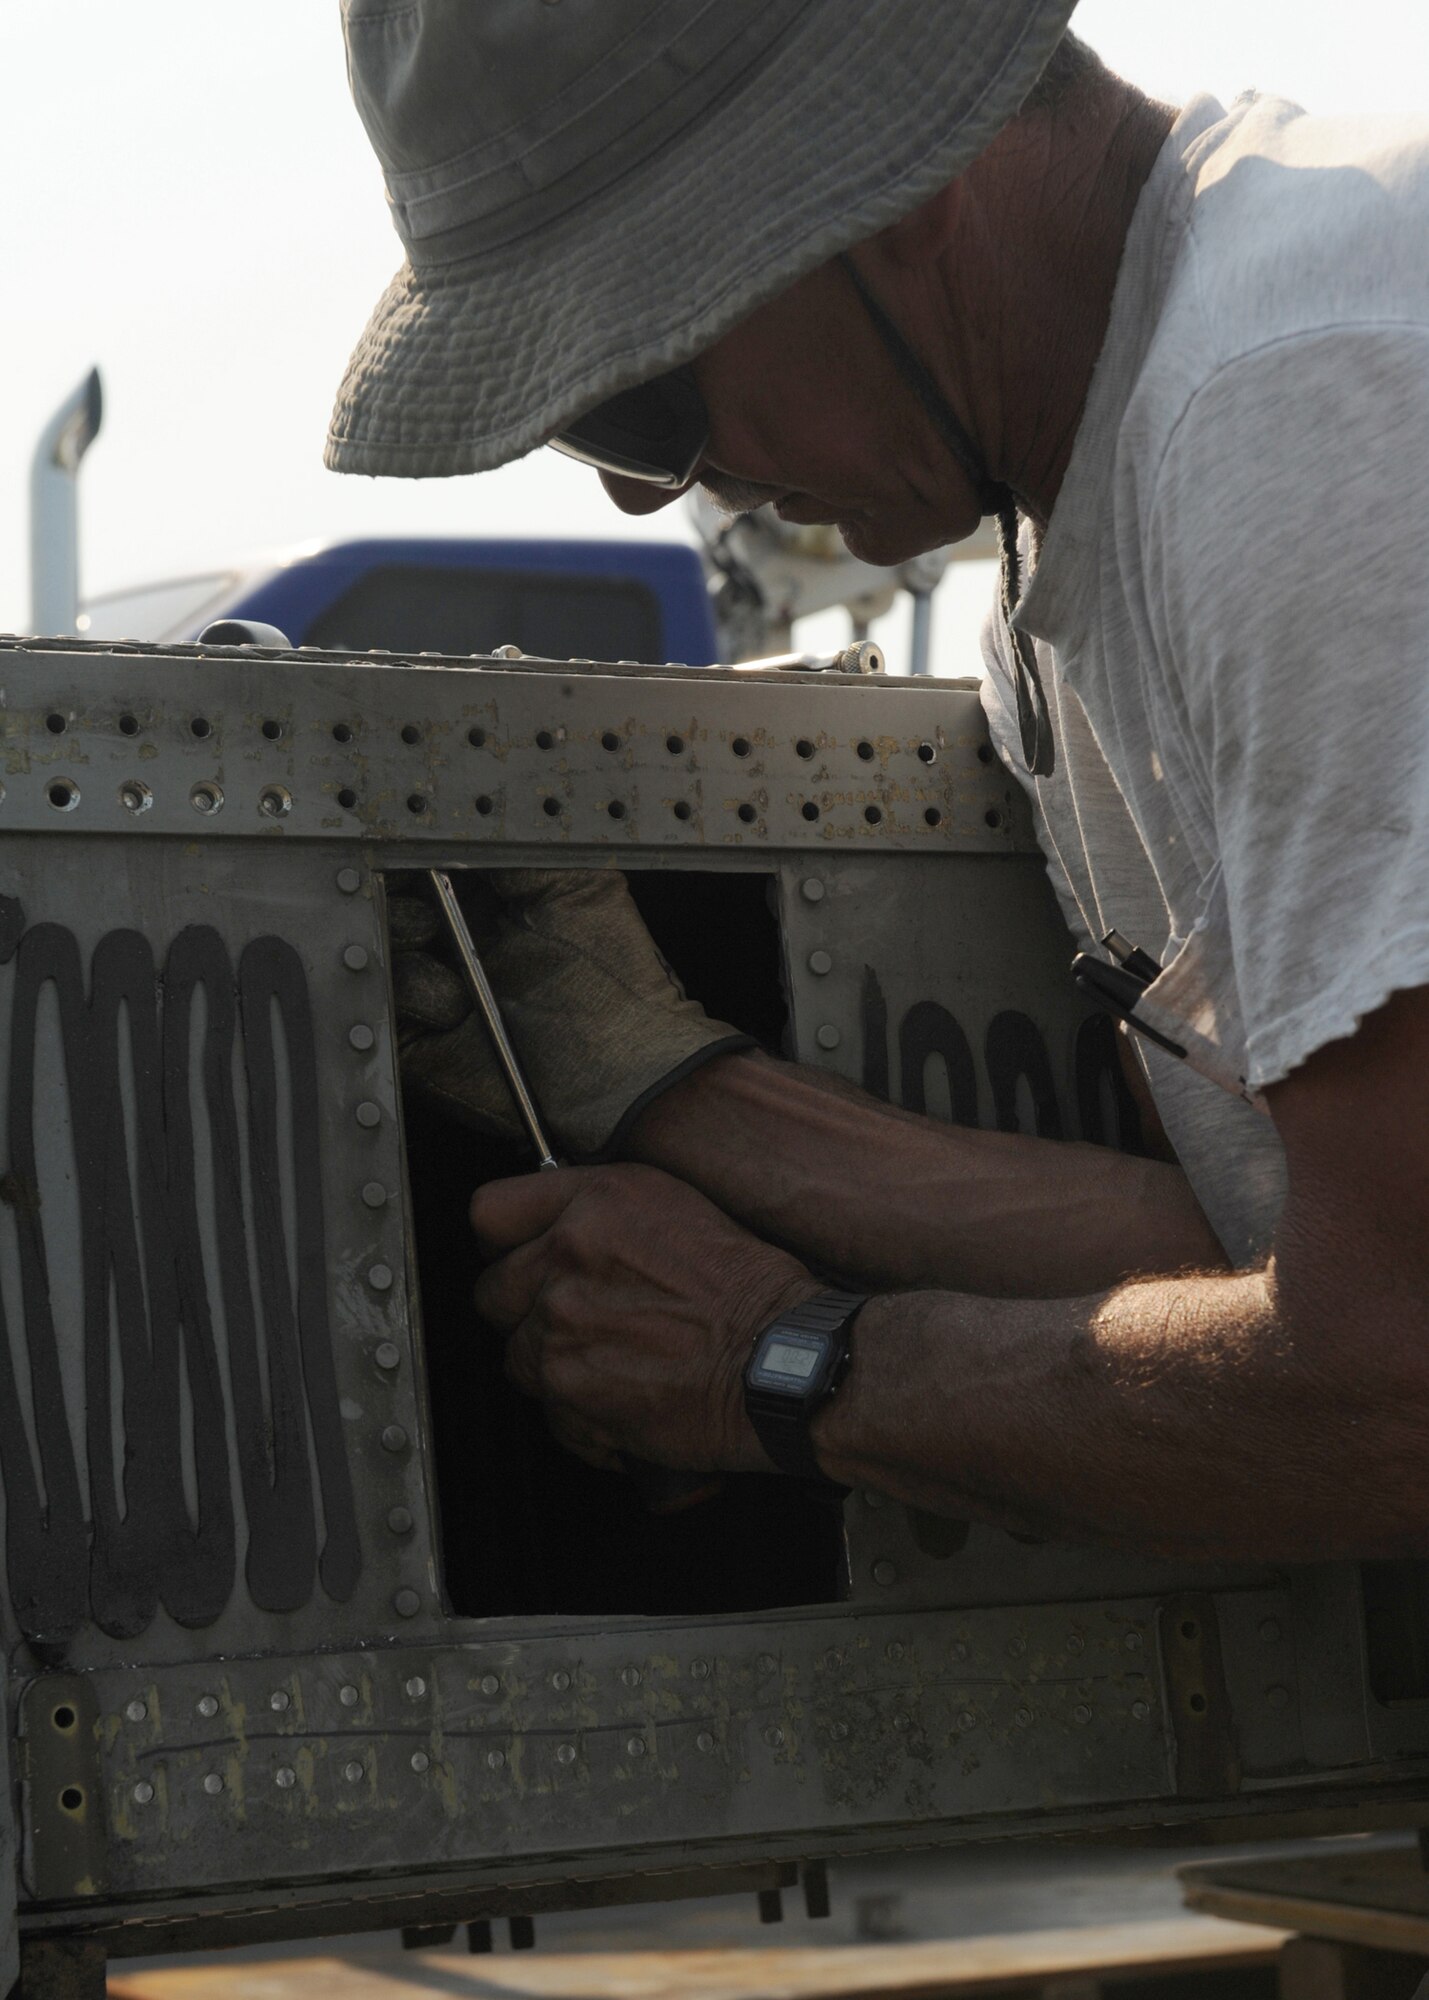 Jim Hale, a employee from Worldwide Aircraft Deliveries Ltd, cleans the spar for attachment to the pile on mount on the wing of an A-10 aircraft here on June 6. The A-10 is going to be part of the static displays on base.(US Air Force photo by A1C Ciara Wymbs)